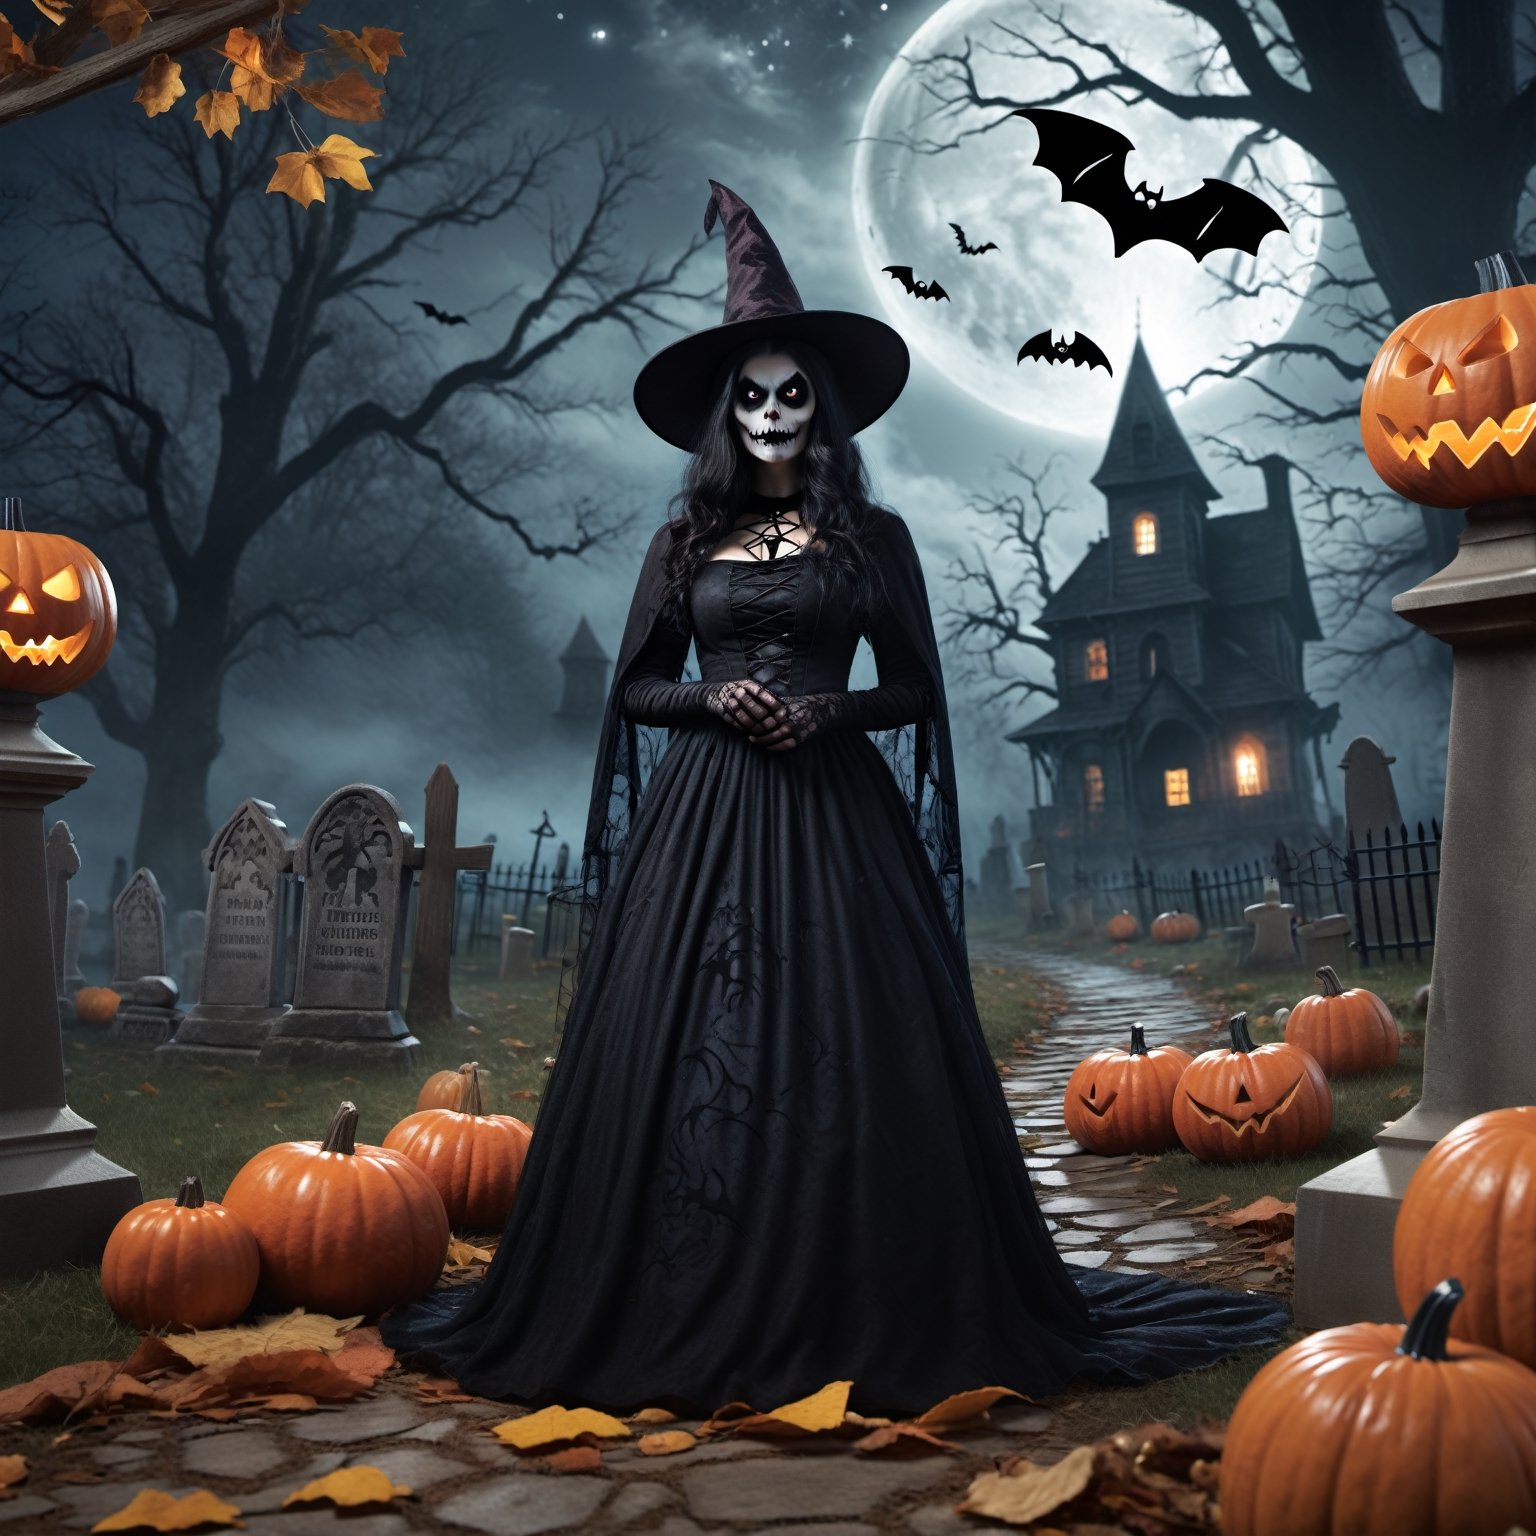 (best quality,4k,8k,highres,masterpiece:1.2),ultra-detailed,(realistic,photorealistic,photo-realistic:1.37),spooky,horror,dark,A girl in a halloween garden,creepy atmosphere,haunted vibe,witch costume,huge full moon,scary trees,carved pumpkins,witch hat,candlelit path,ghostly shadows,decorations hanging from trees,spiderwebs,fall leaves blowing in the wind,flickering lanterns,ominous fog,abandoned mansion,silent night,witch cauldron,bats flying in the sky,giant spiders crawling,skeletons and skulls,menacing black cat,starry night sky,cackling sounds,graveyard with tombstones,full of mysterious mist,witch broom,witch cackling,witch potion,magic spells,witch's familiar,witch brewing magic in a cauldron.

Halloween, 